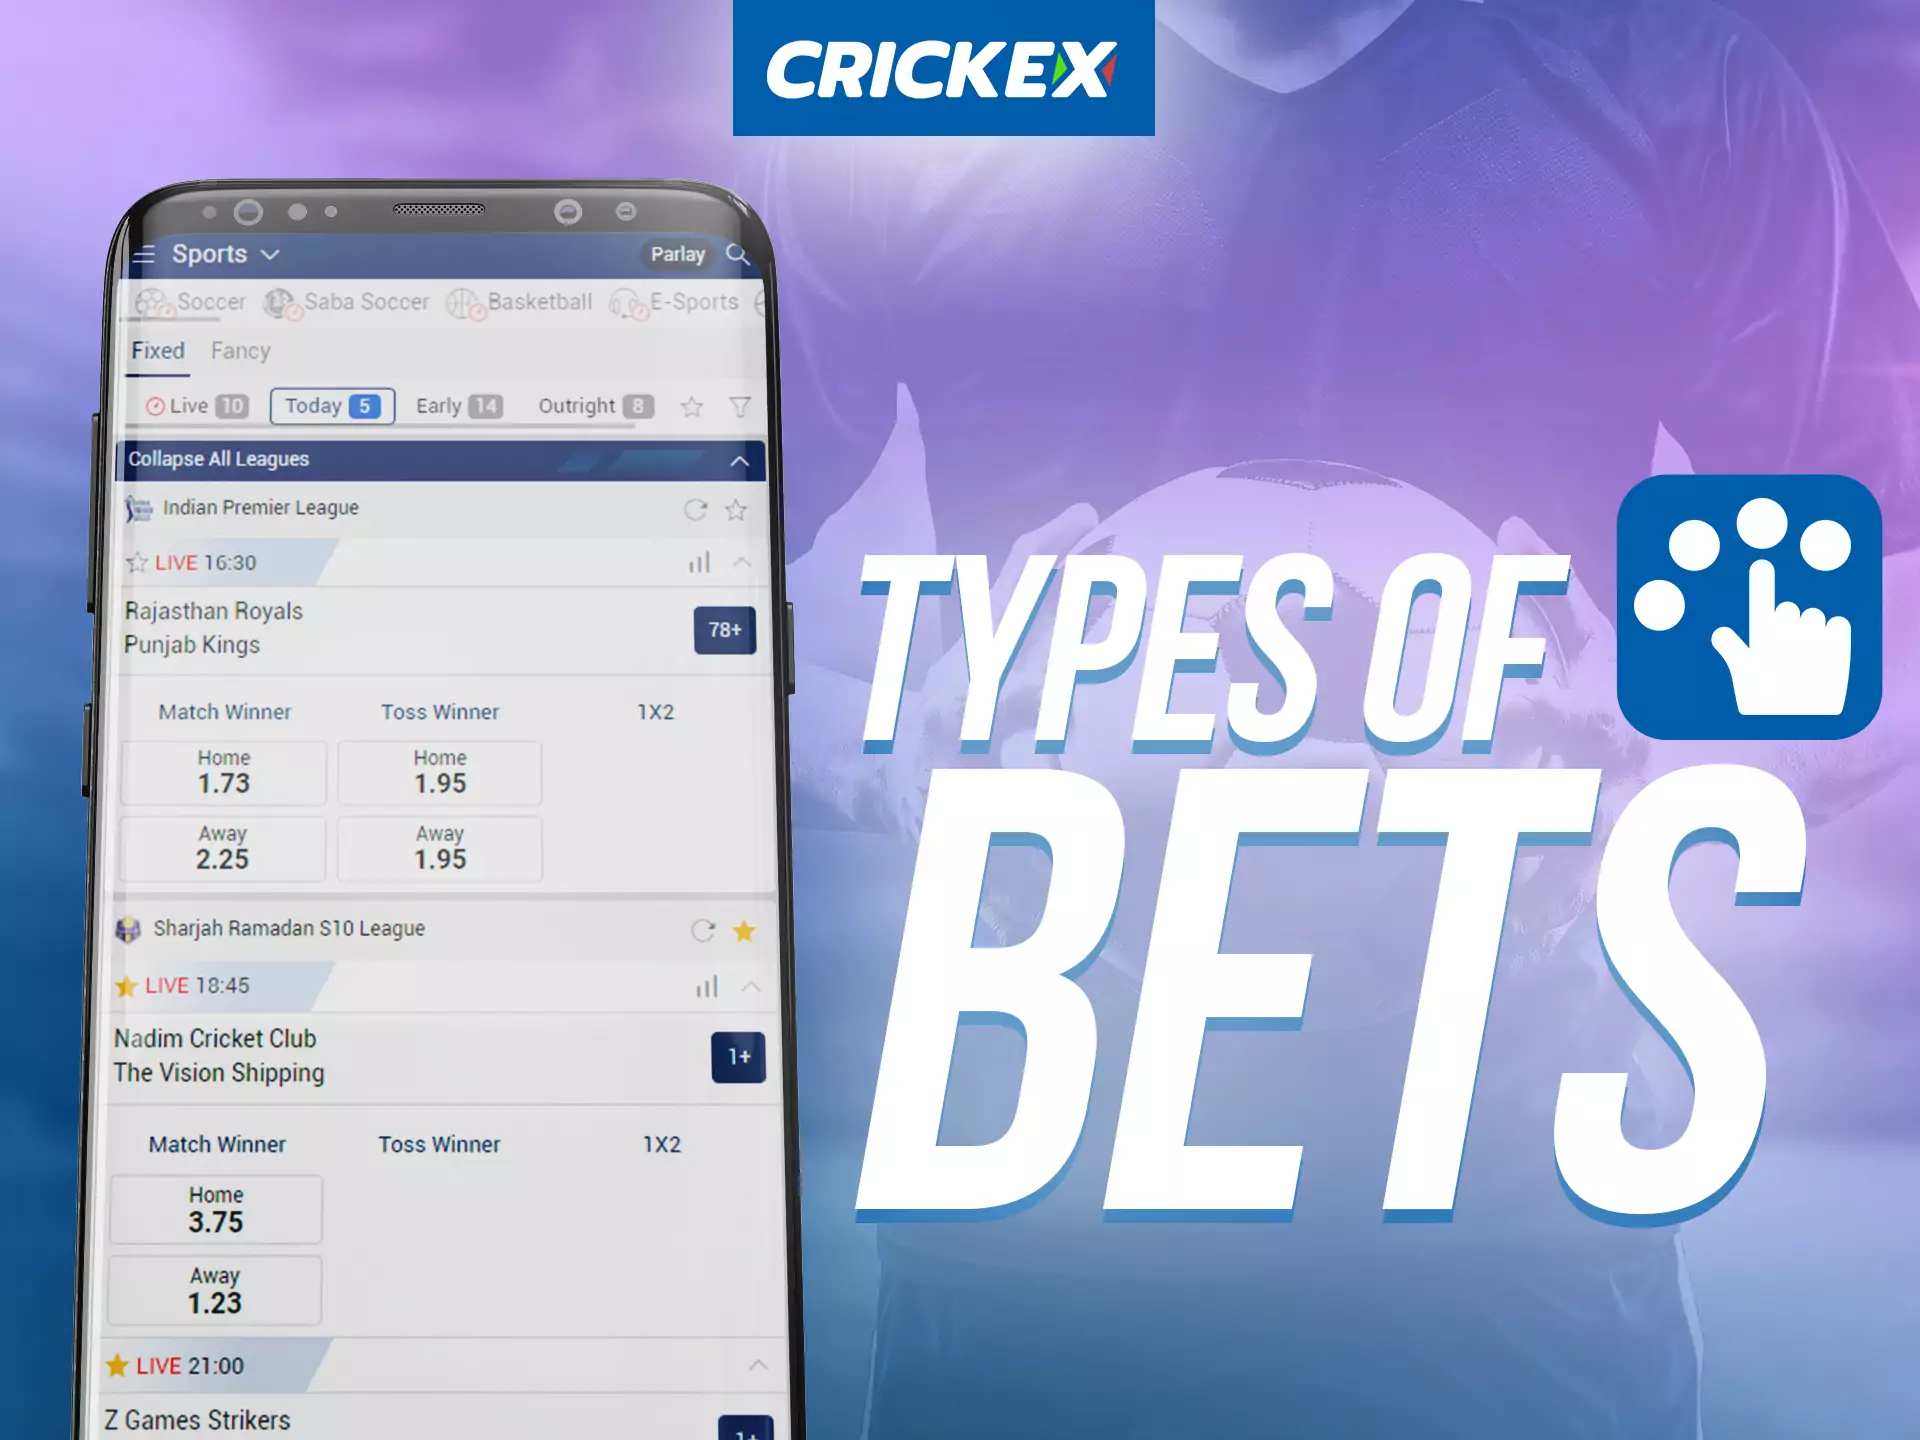 With the Crickex app, try different types of bets.